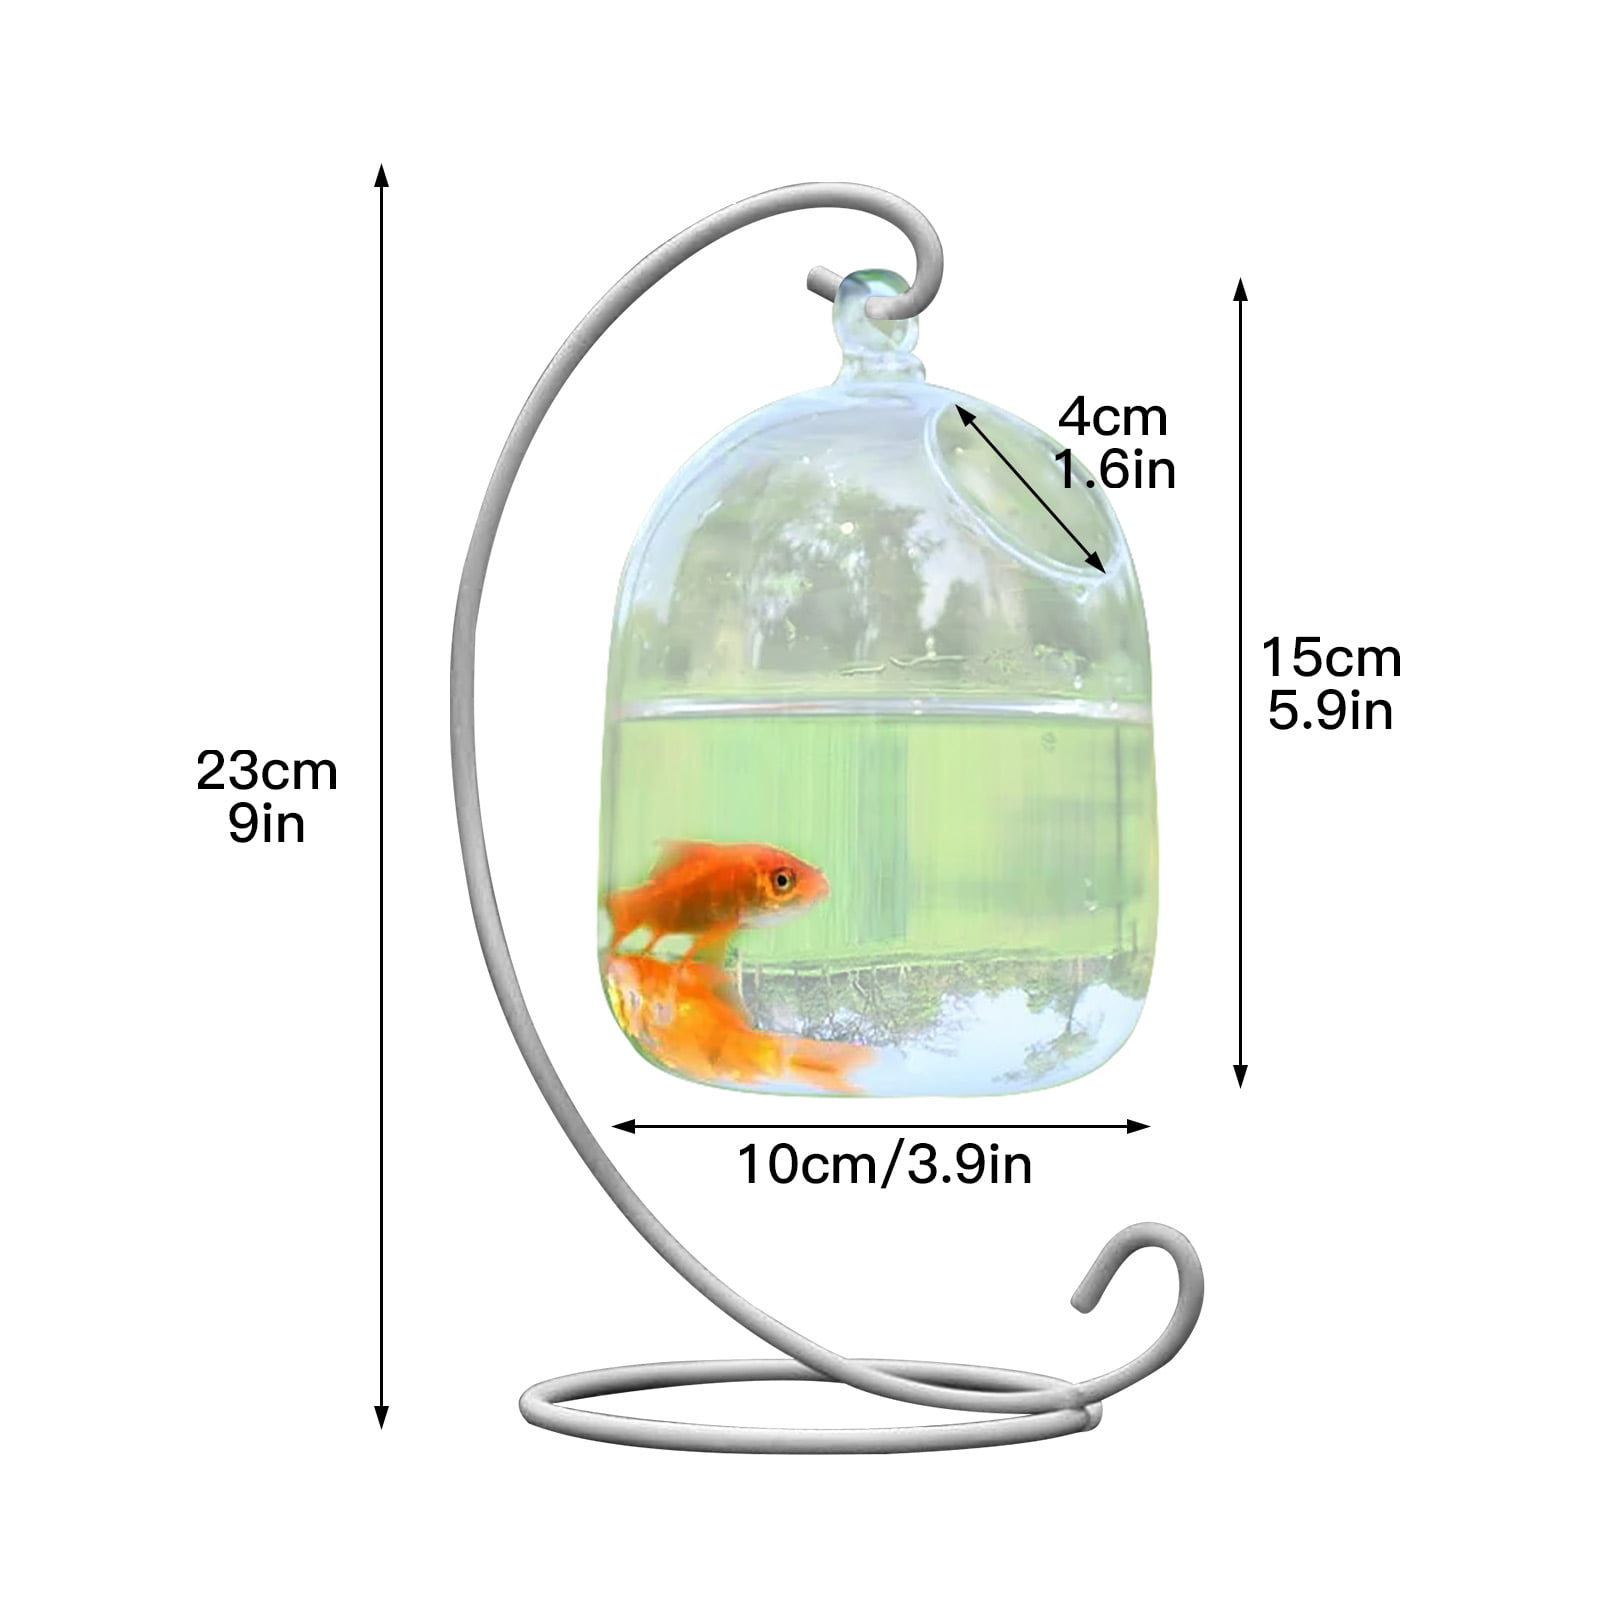 Small Fish Aquarium for Decoration Kedoung Desk Fish Tank Bowl for Betta Fish Hanging with Metal Stand 